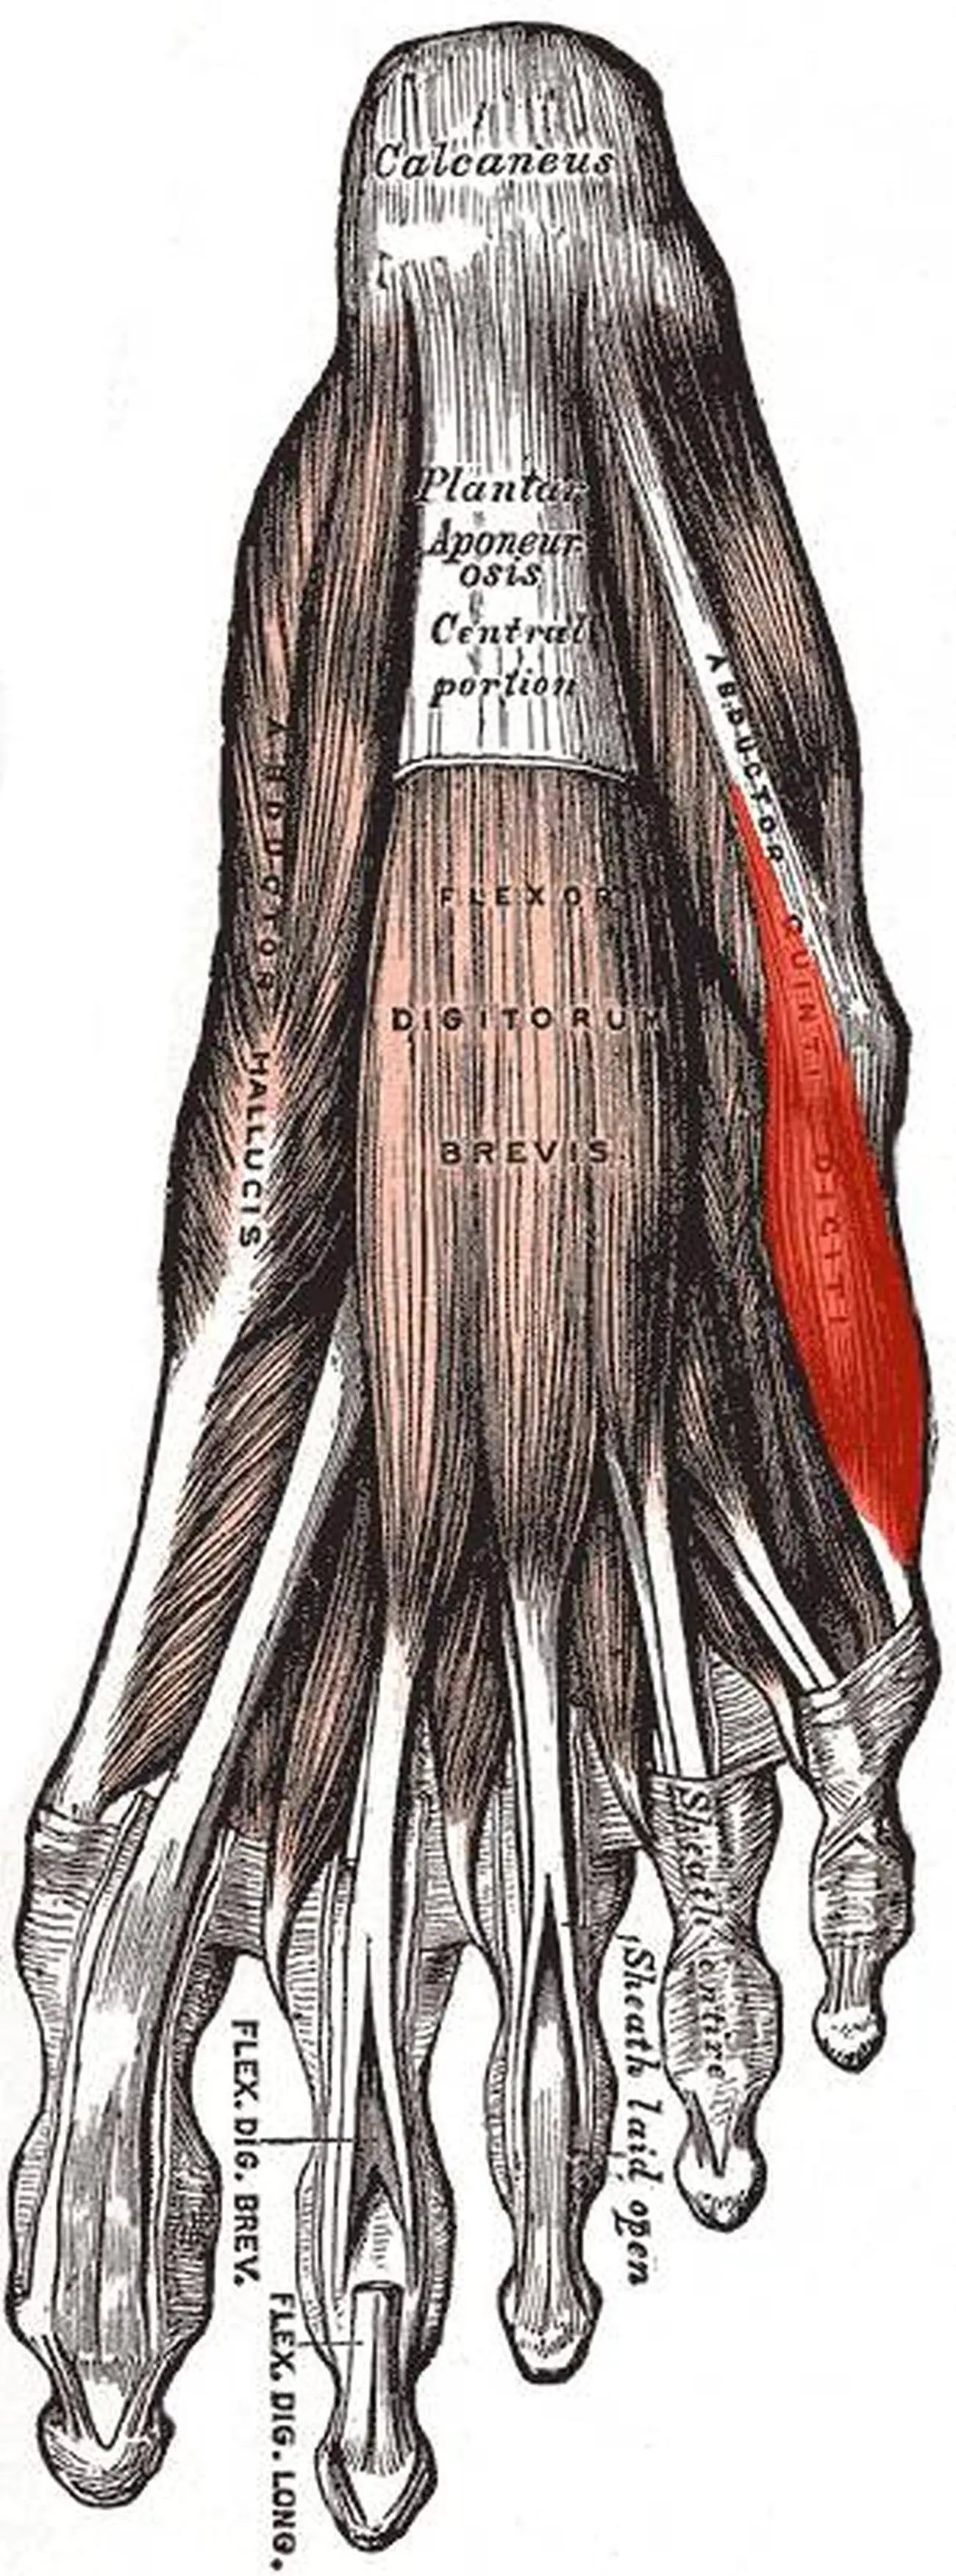 Pictures Of Abductor Digiti Minimi Muscle